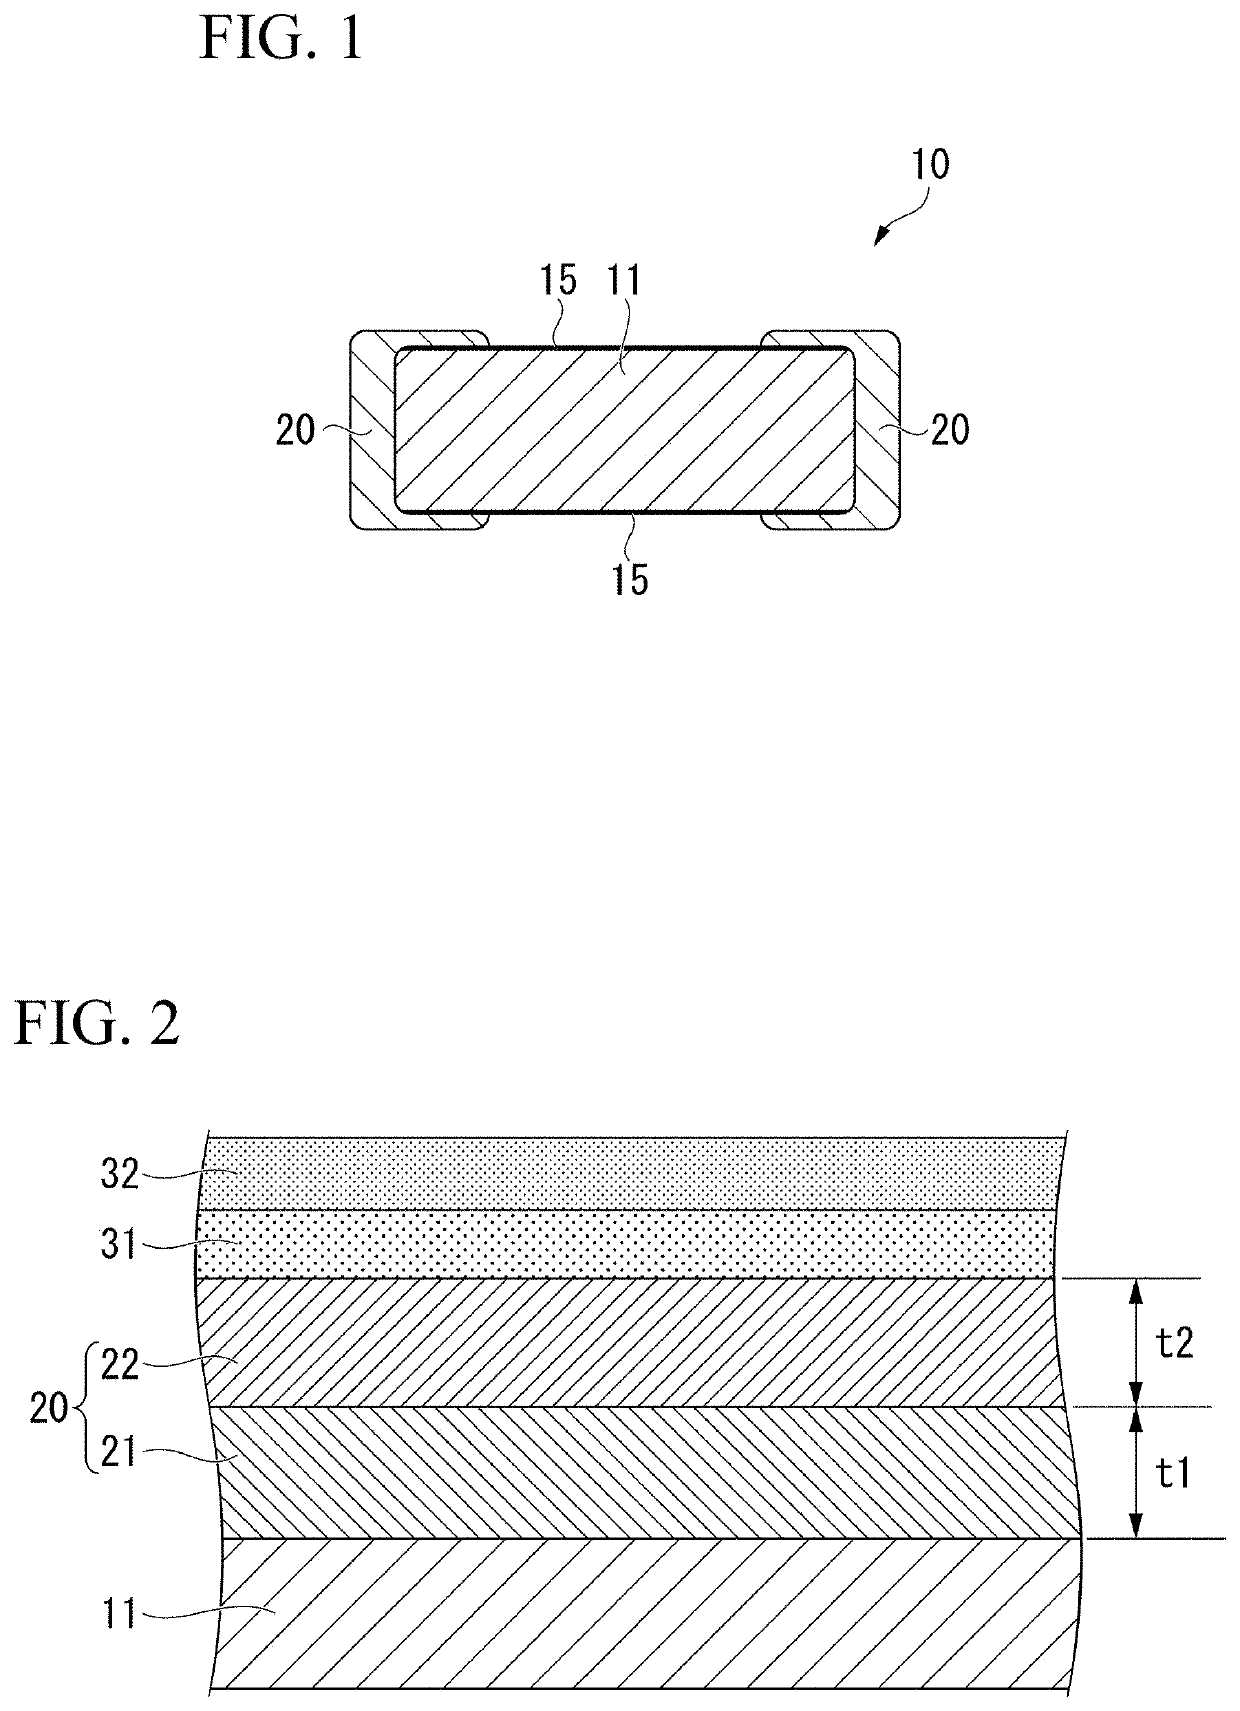 Method of manufacturing thermistor